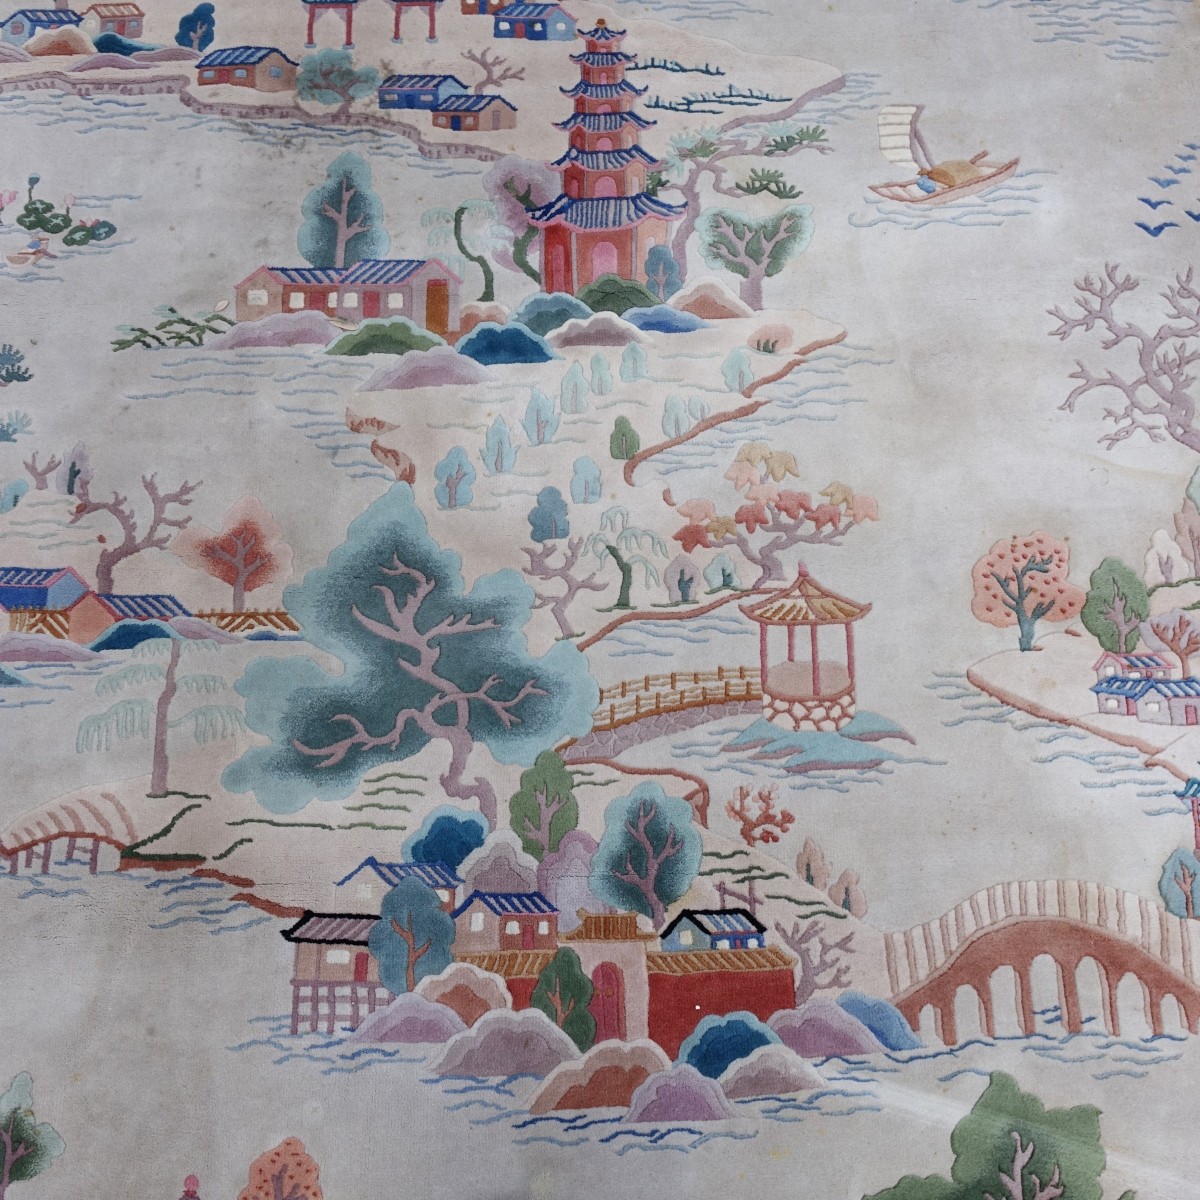 Large Chinese Scenic Wool Rug